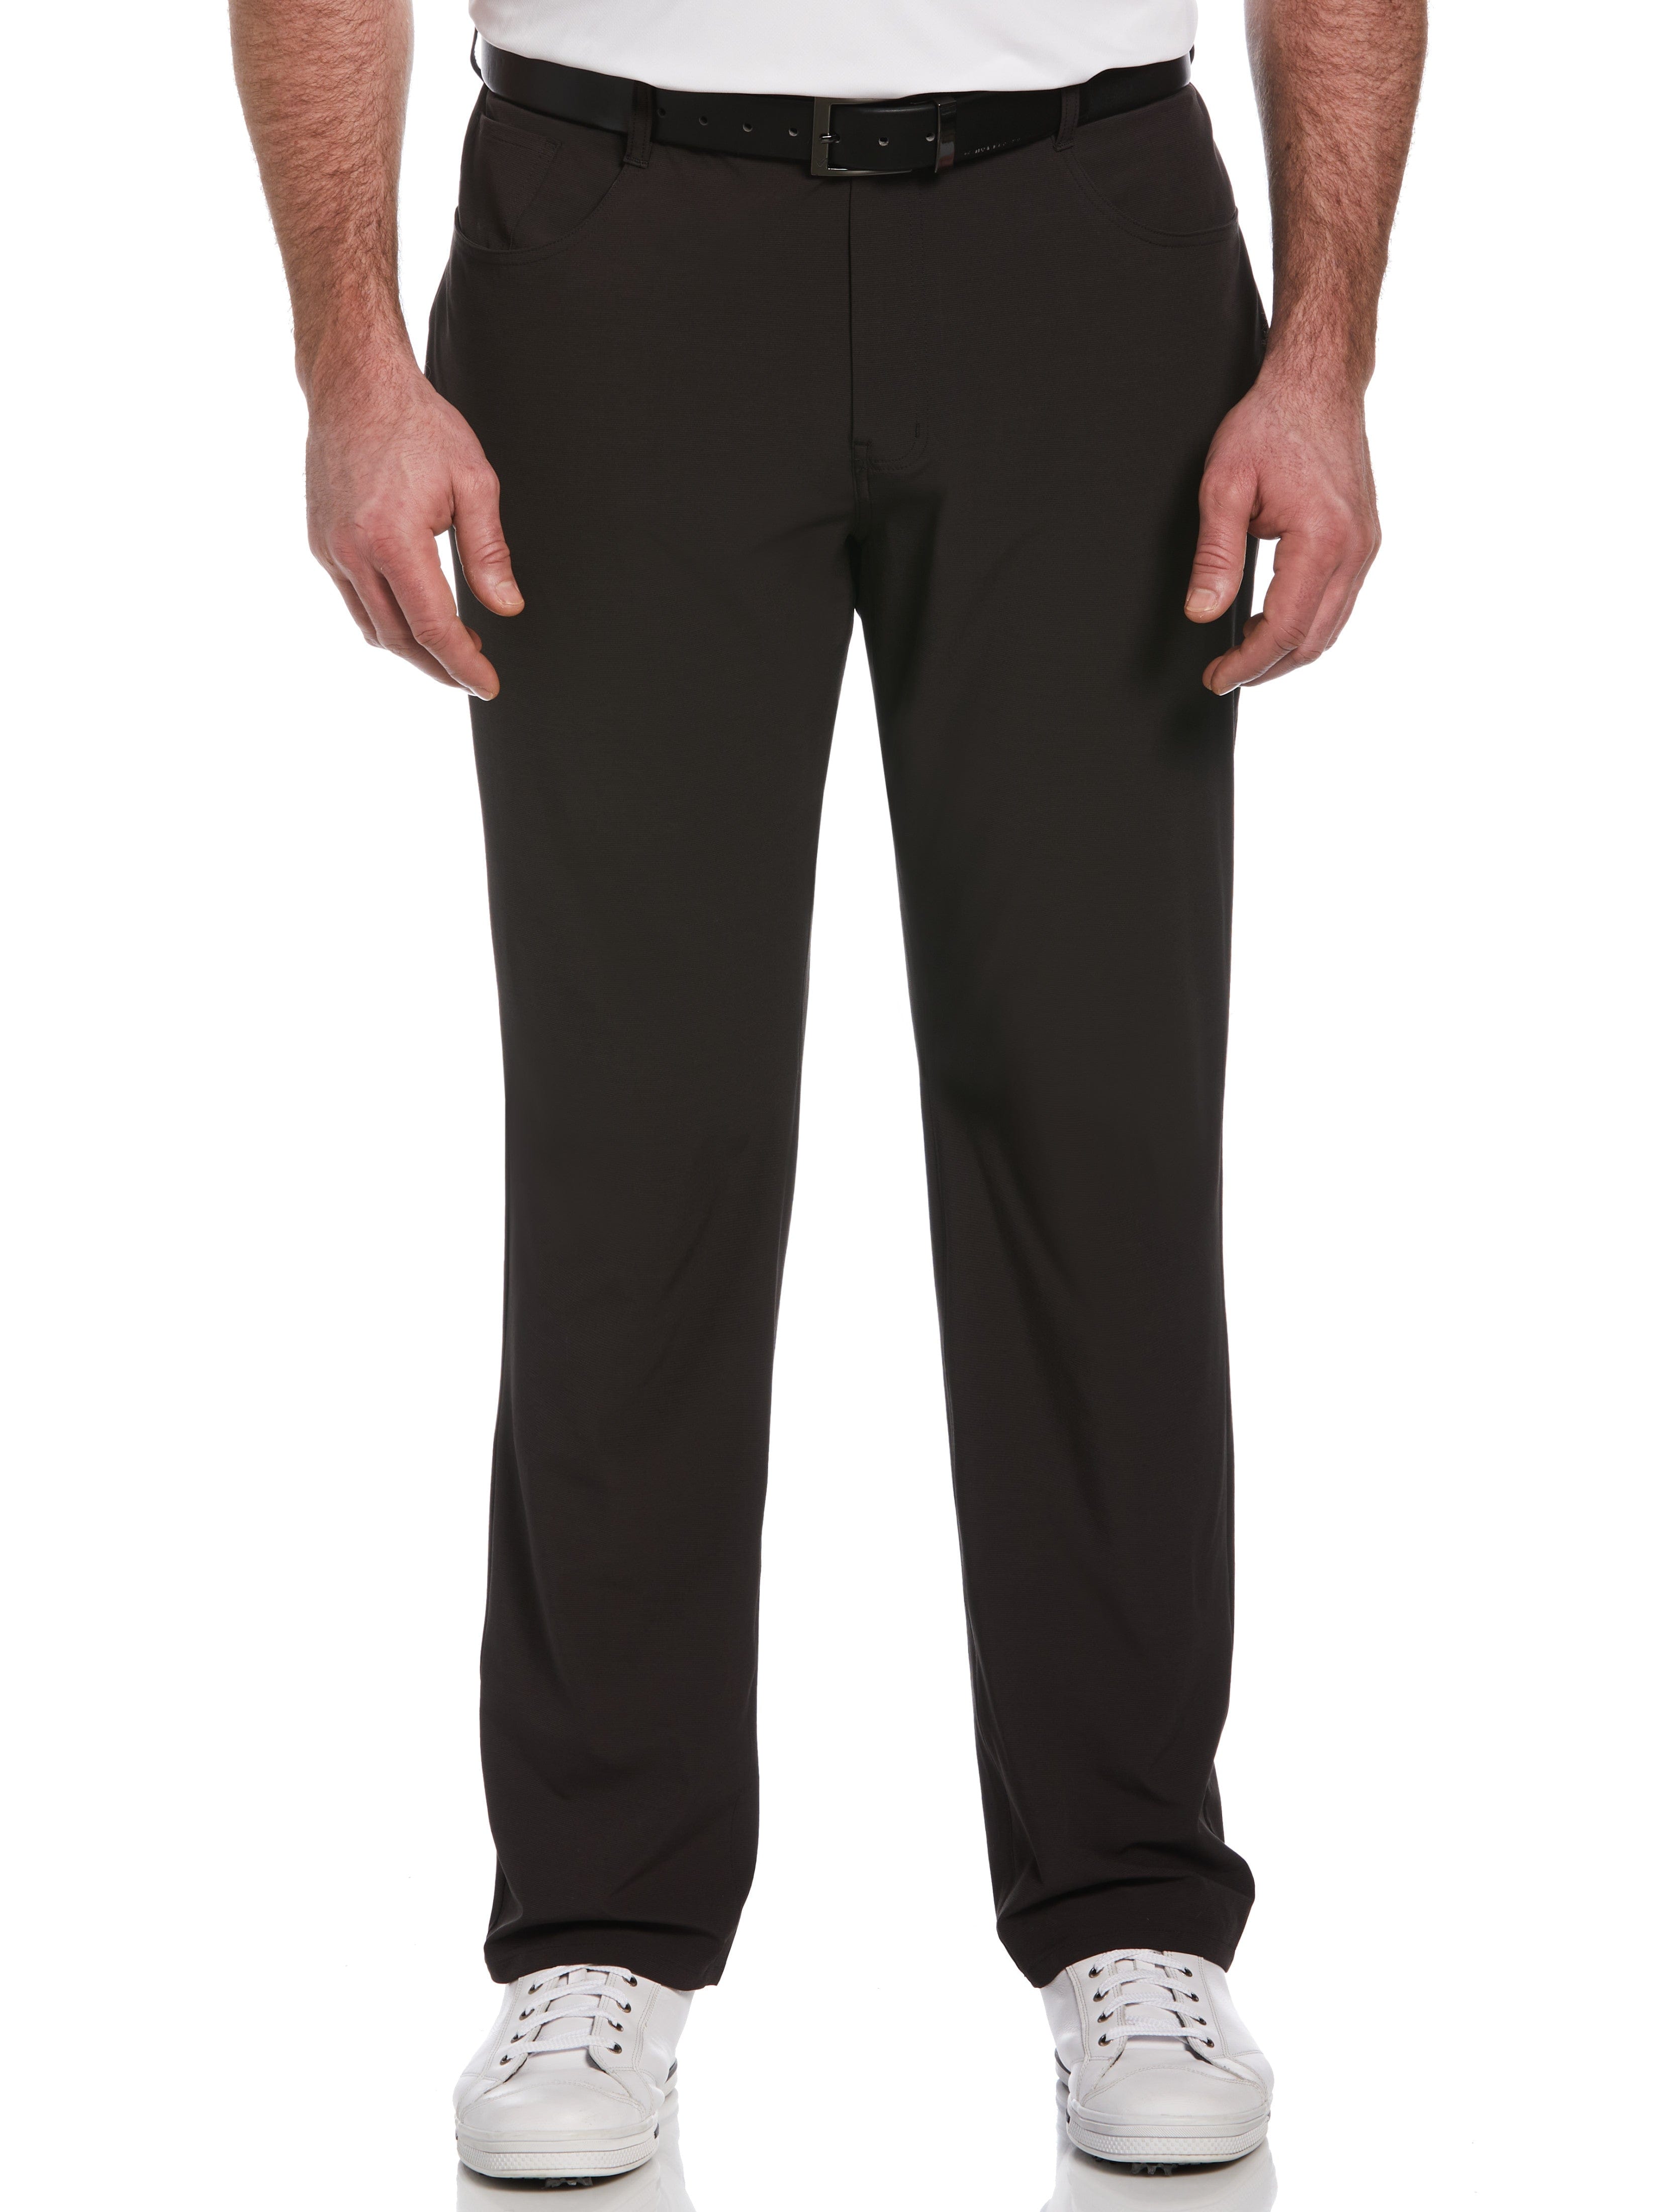 Mens Rugby Trousers Fully Elasticated Waist Office Smart Big Plus Size Work  Pant | eBay